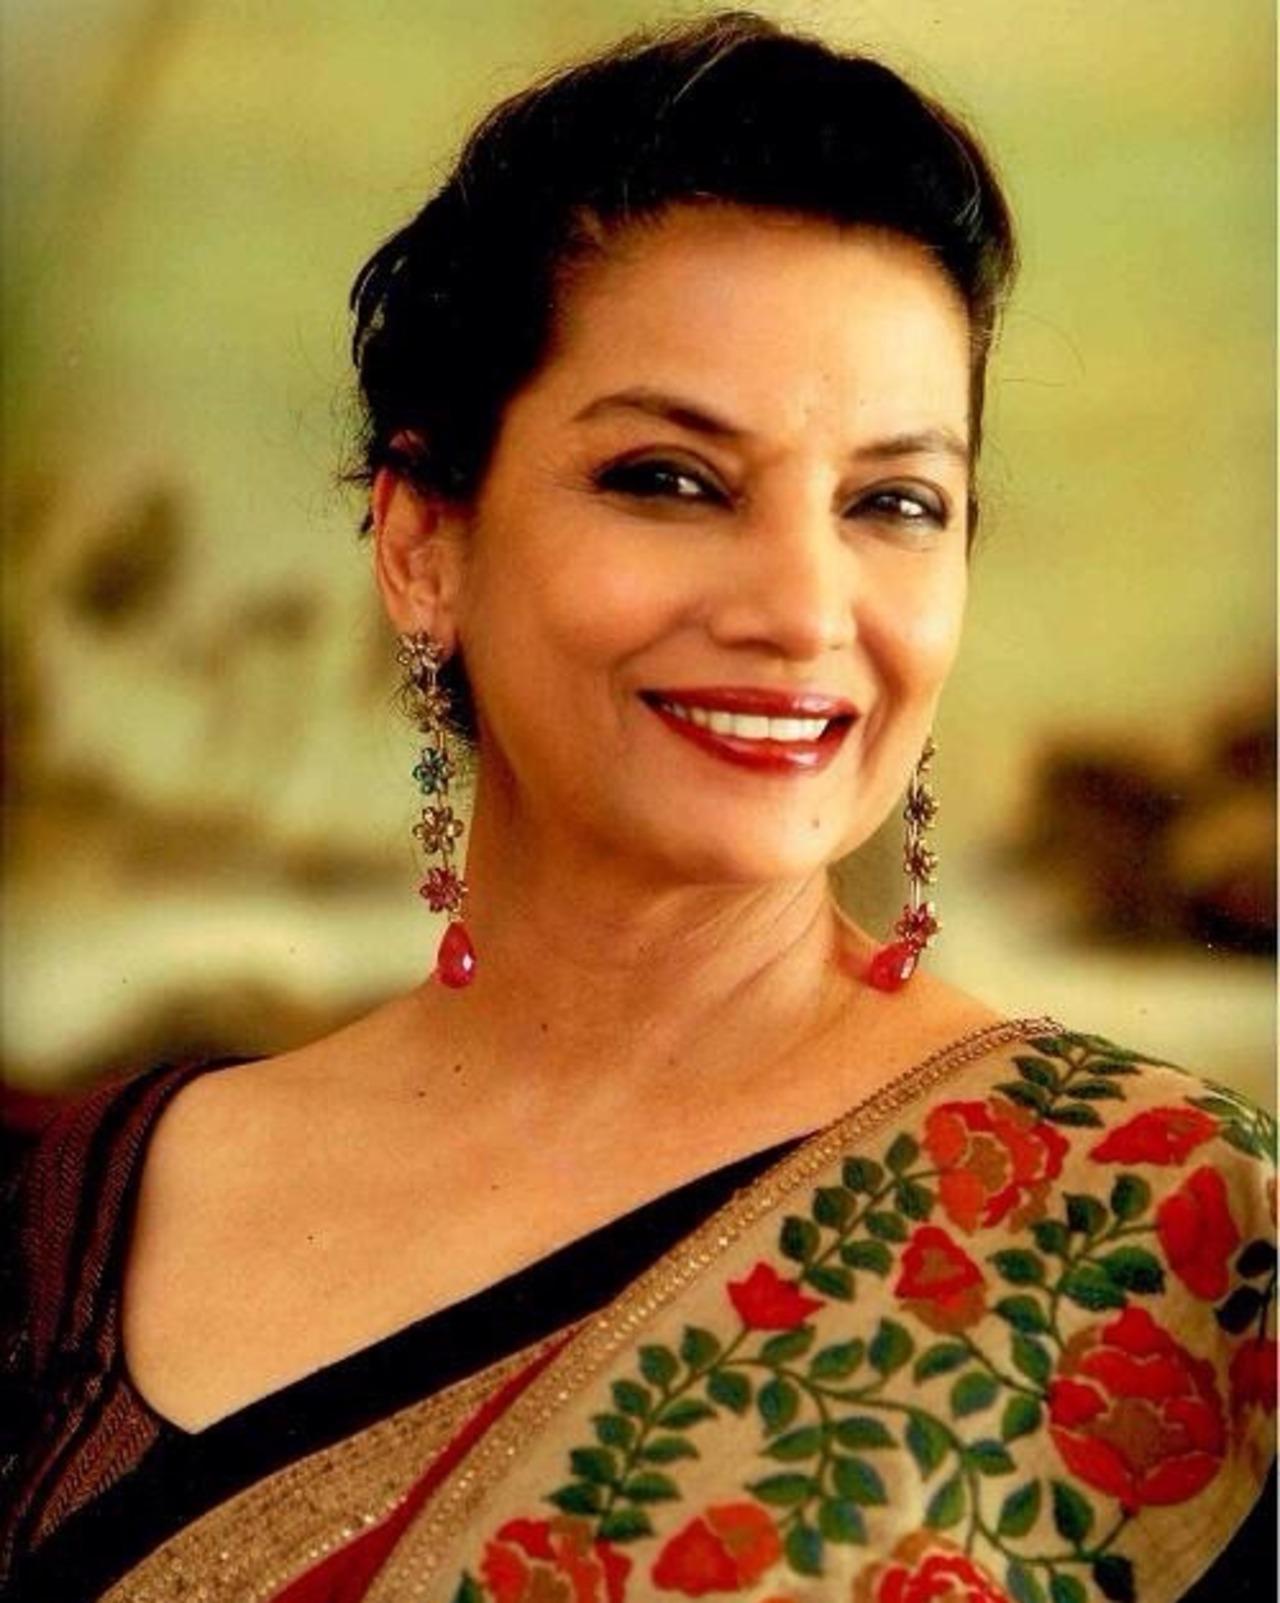 She pursued her education at St. Xavier's College in Mumbai and later at the Film and Television Institute of India (FTII) in Pune, where she honed her acting skills